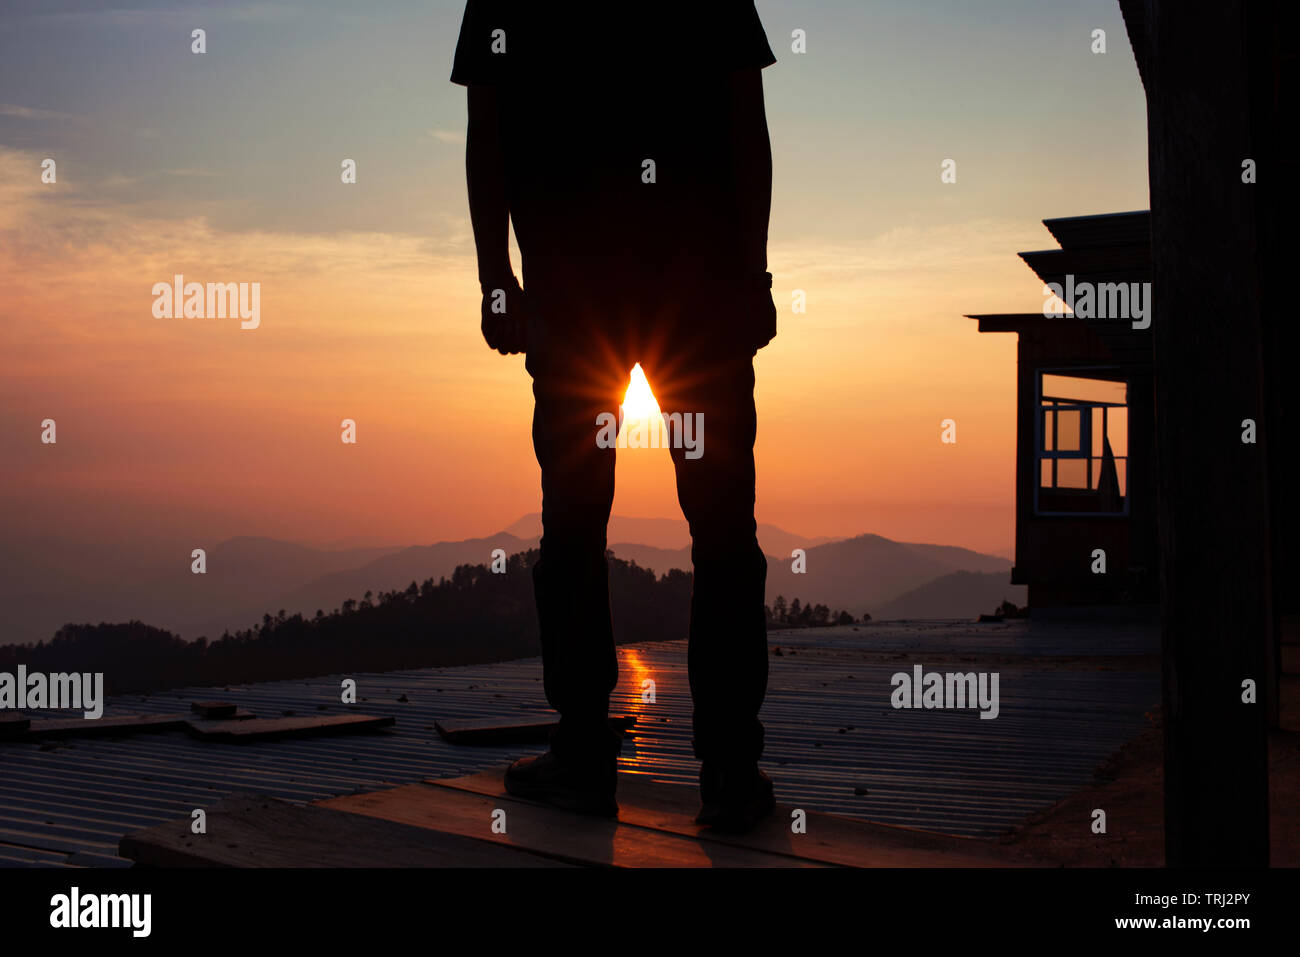 Silhouette of a man standing on the roof high up watching the sunset. San José del Pacífico, Oaxaca, Mexico. May 2019 Stock Photo